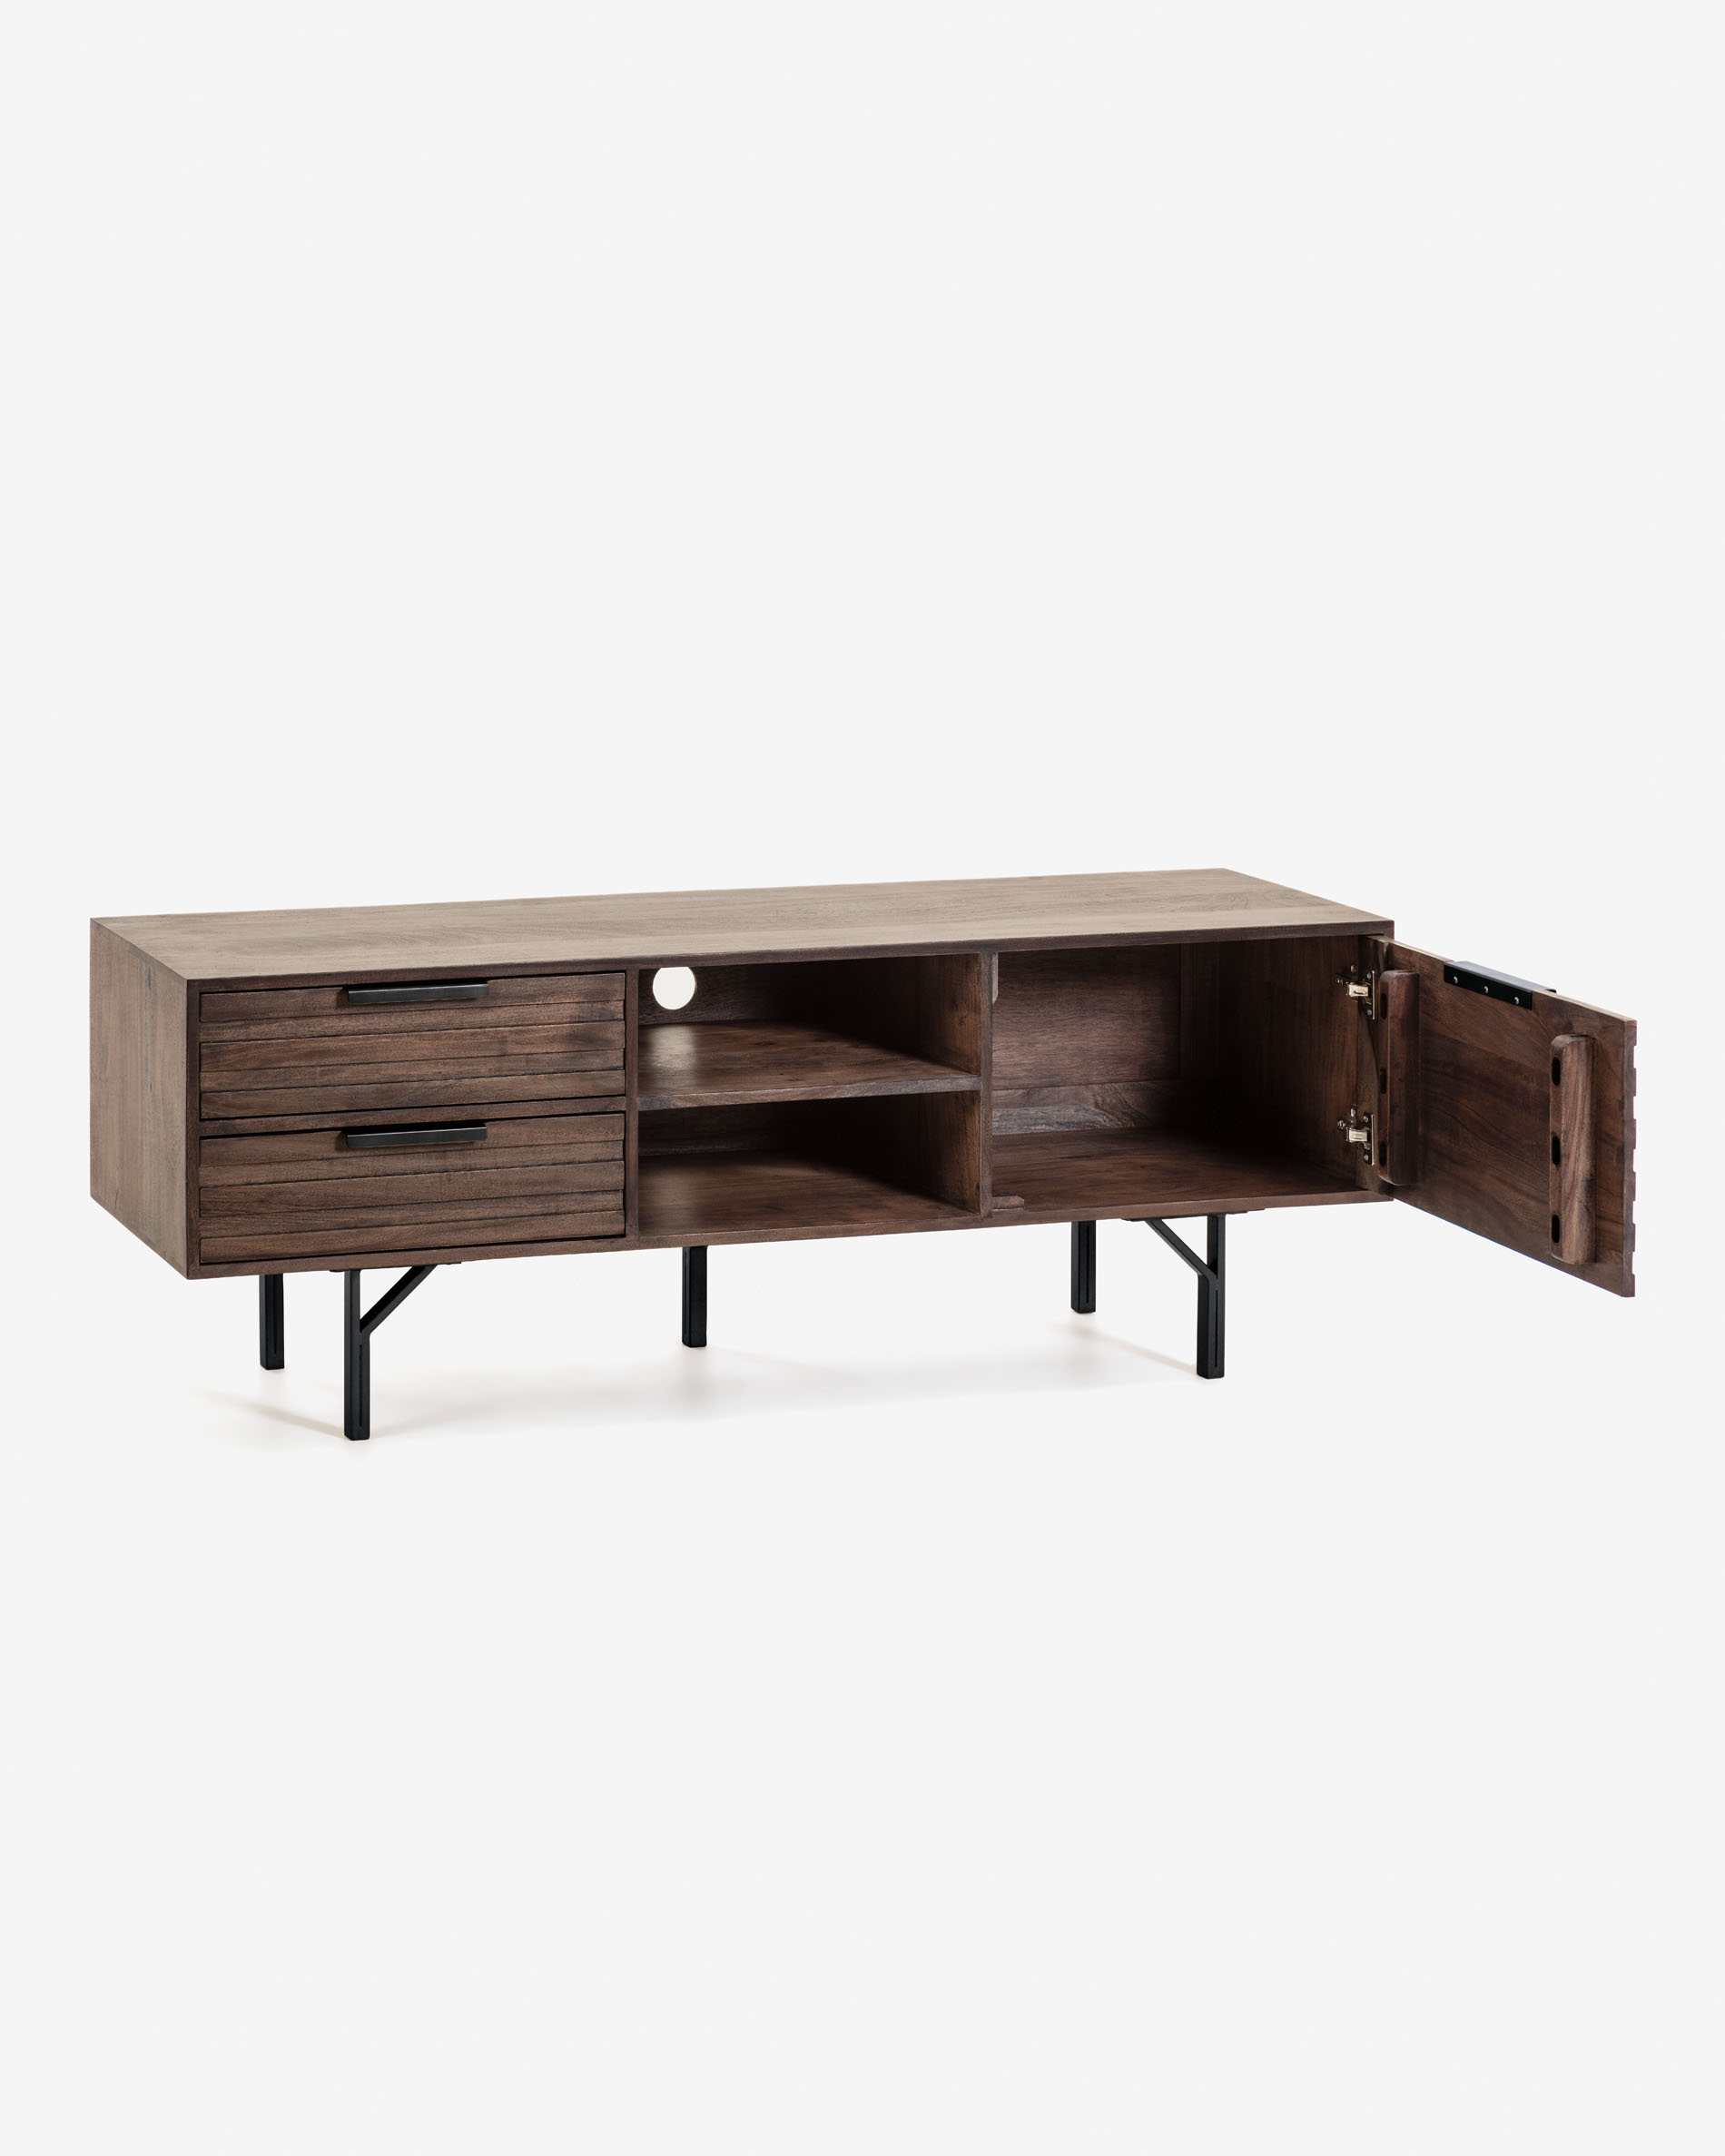 Table Et Banc Luxe Tv Furniture